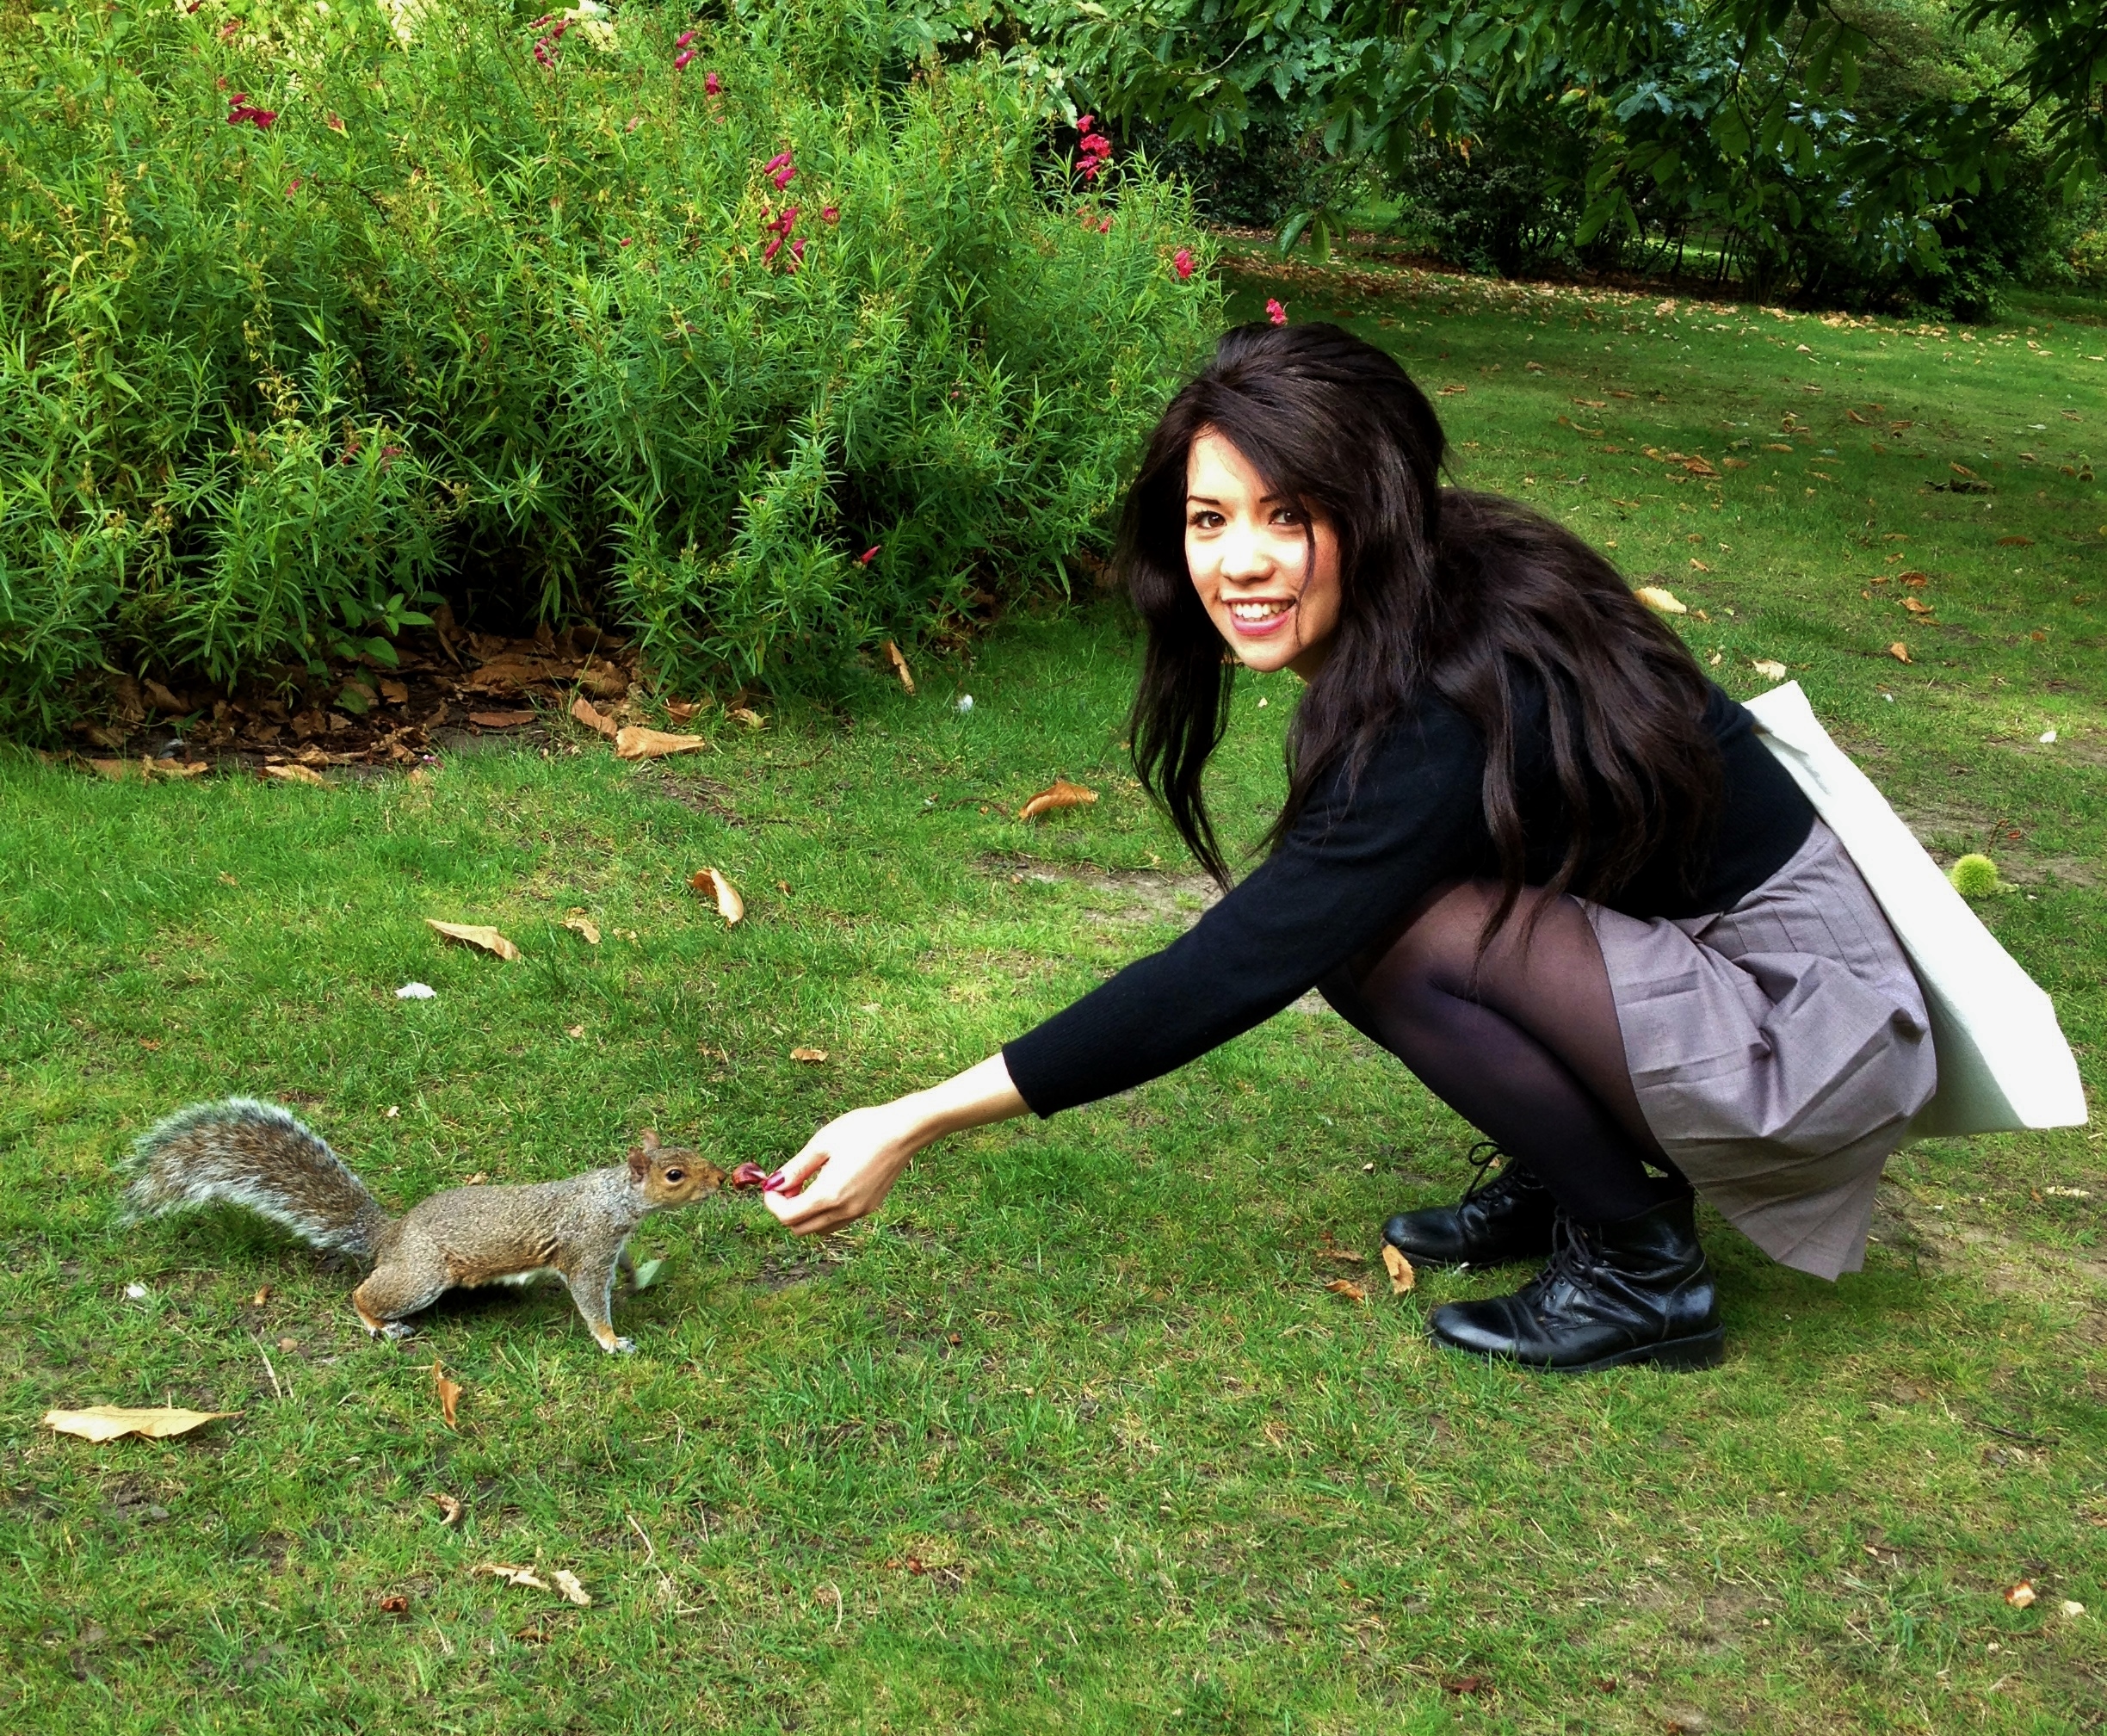 The squirrels in Greenwich Park